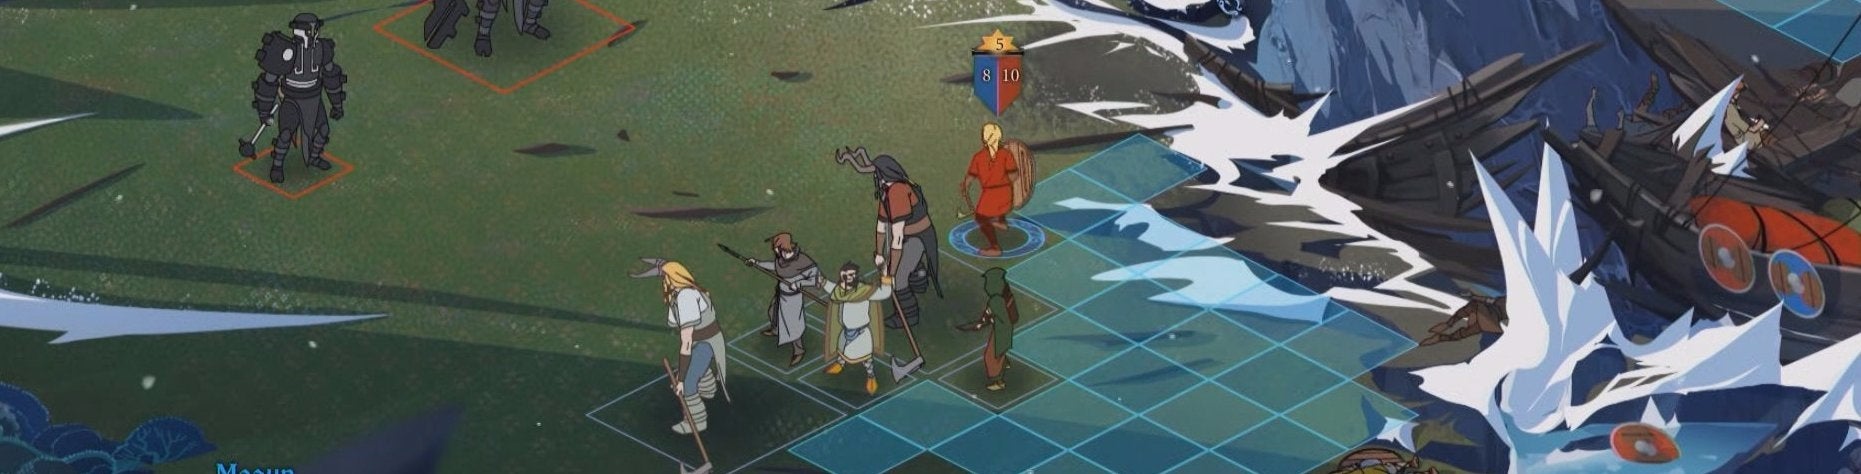 Image for Watch: 33 minutes of The Banner Saga 2